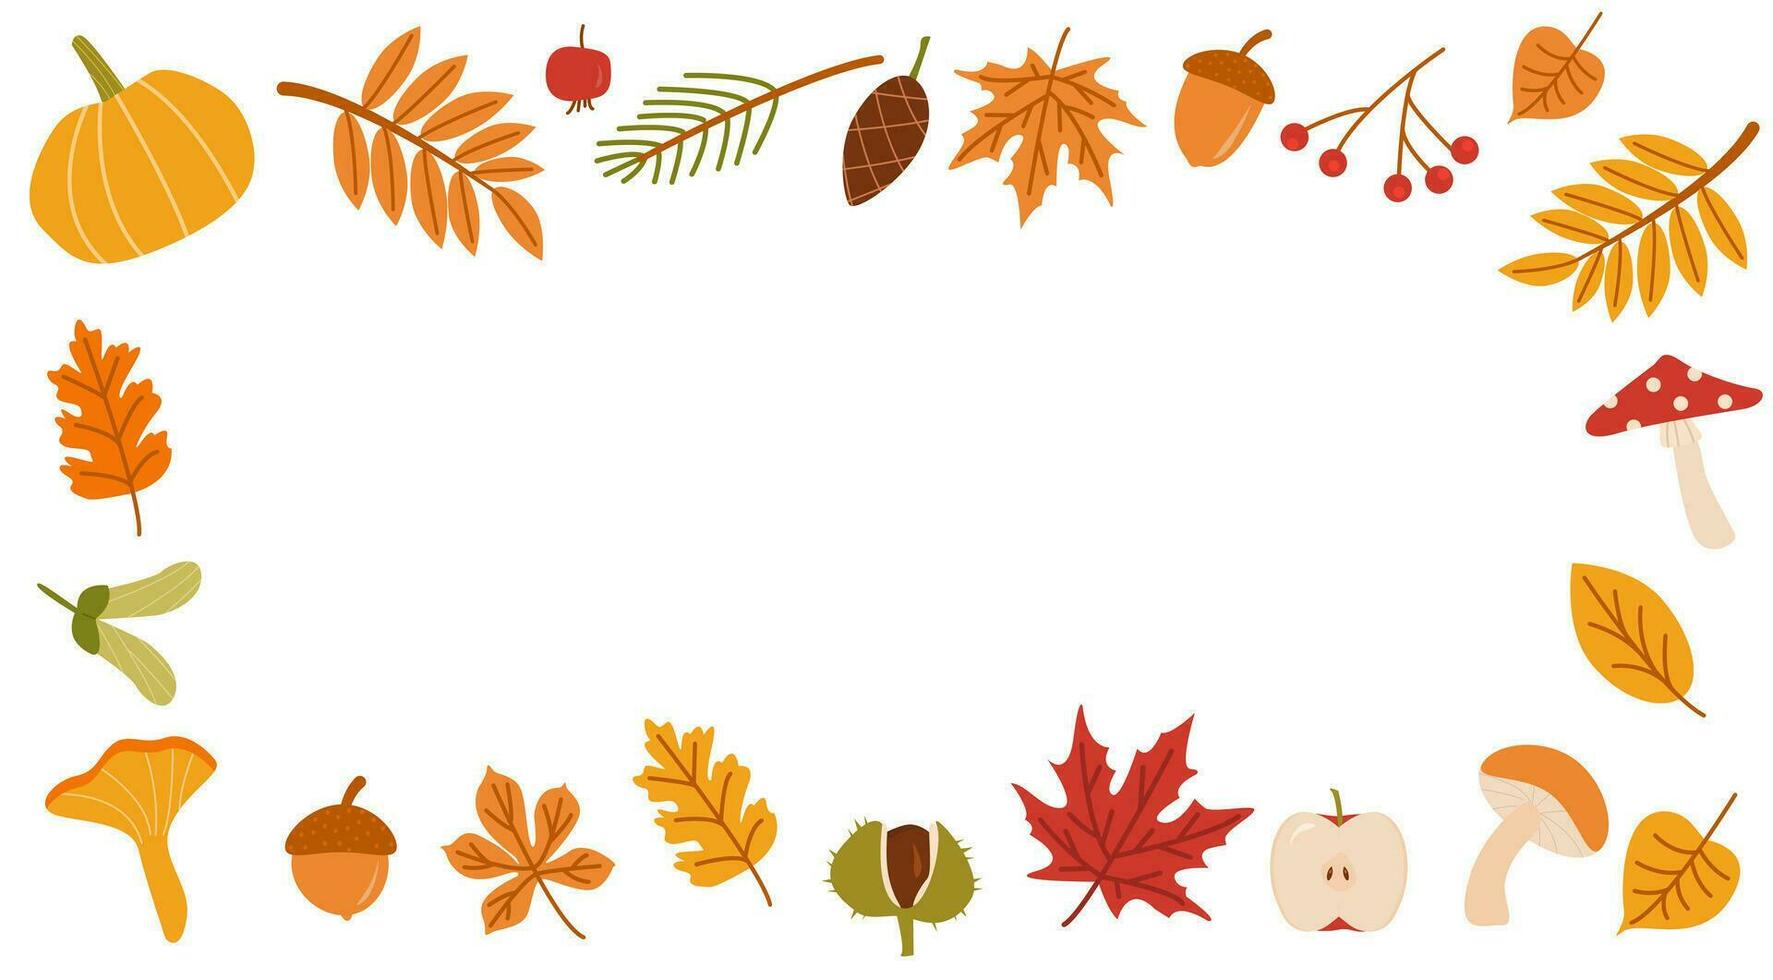 Autumn forest flora flat vector illustration. Decorative fall themed background botanical concept. Seasonal nature banner design. Various colorful tree leaves, branches, wild mushrooms and fruits.